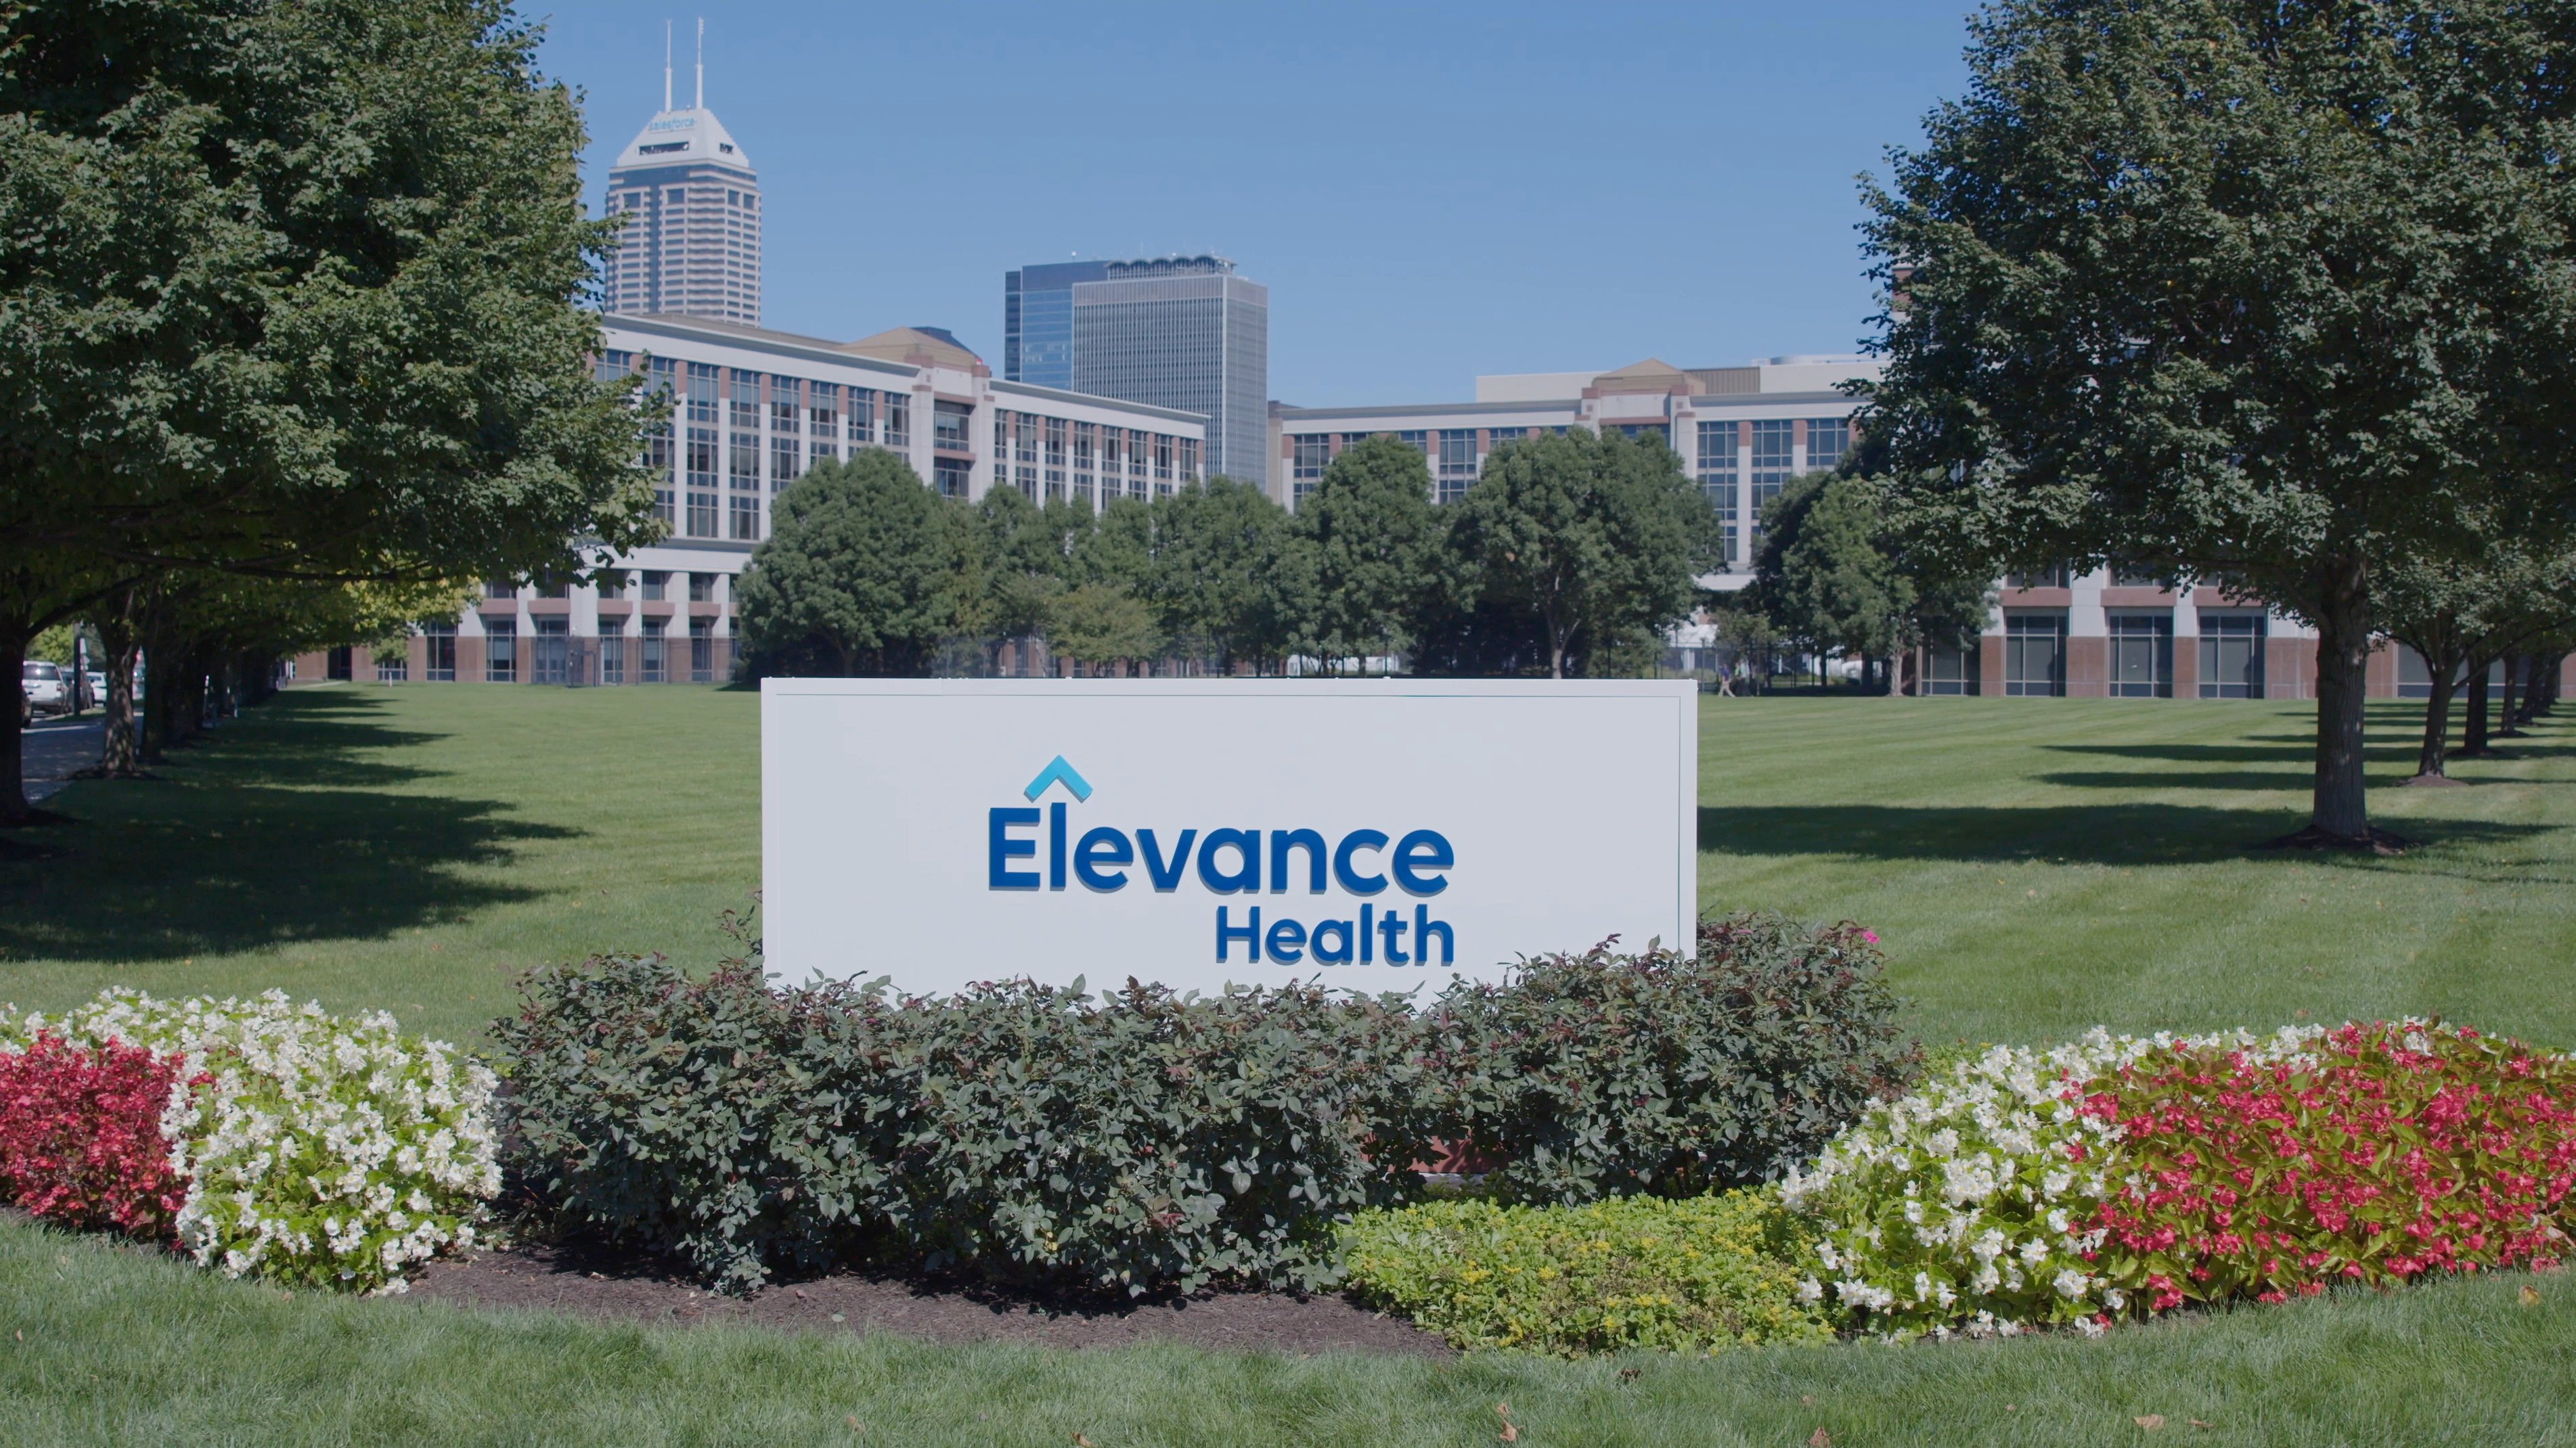 Elevance Health partners with private equity to boost primary care for 1M consumers